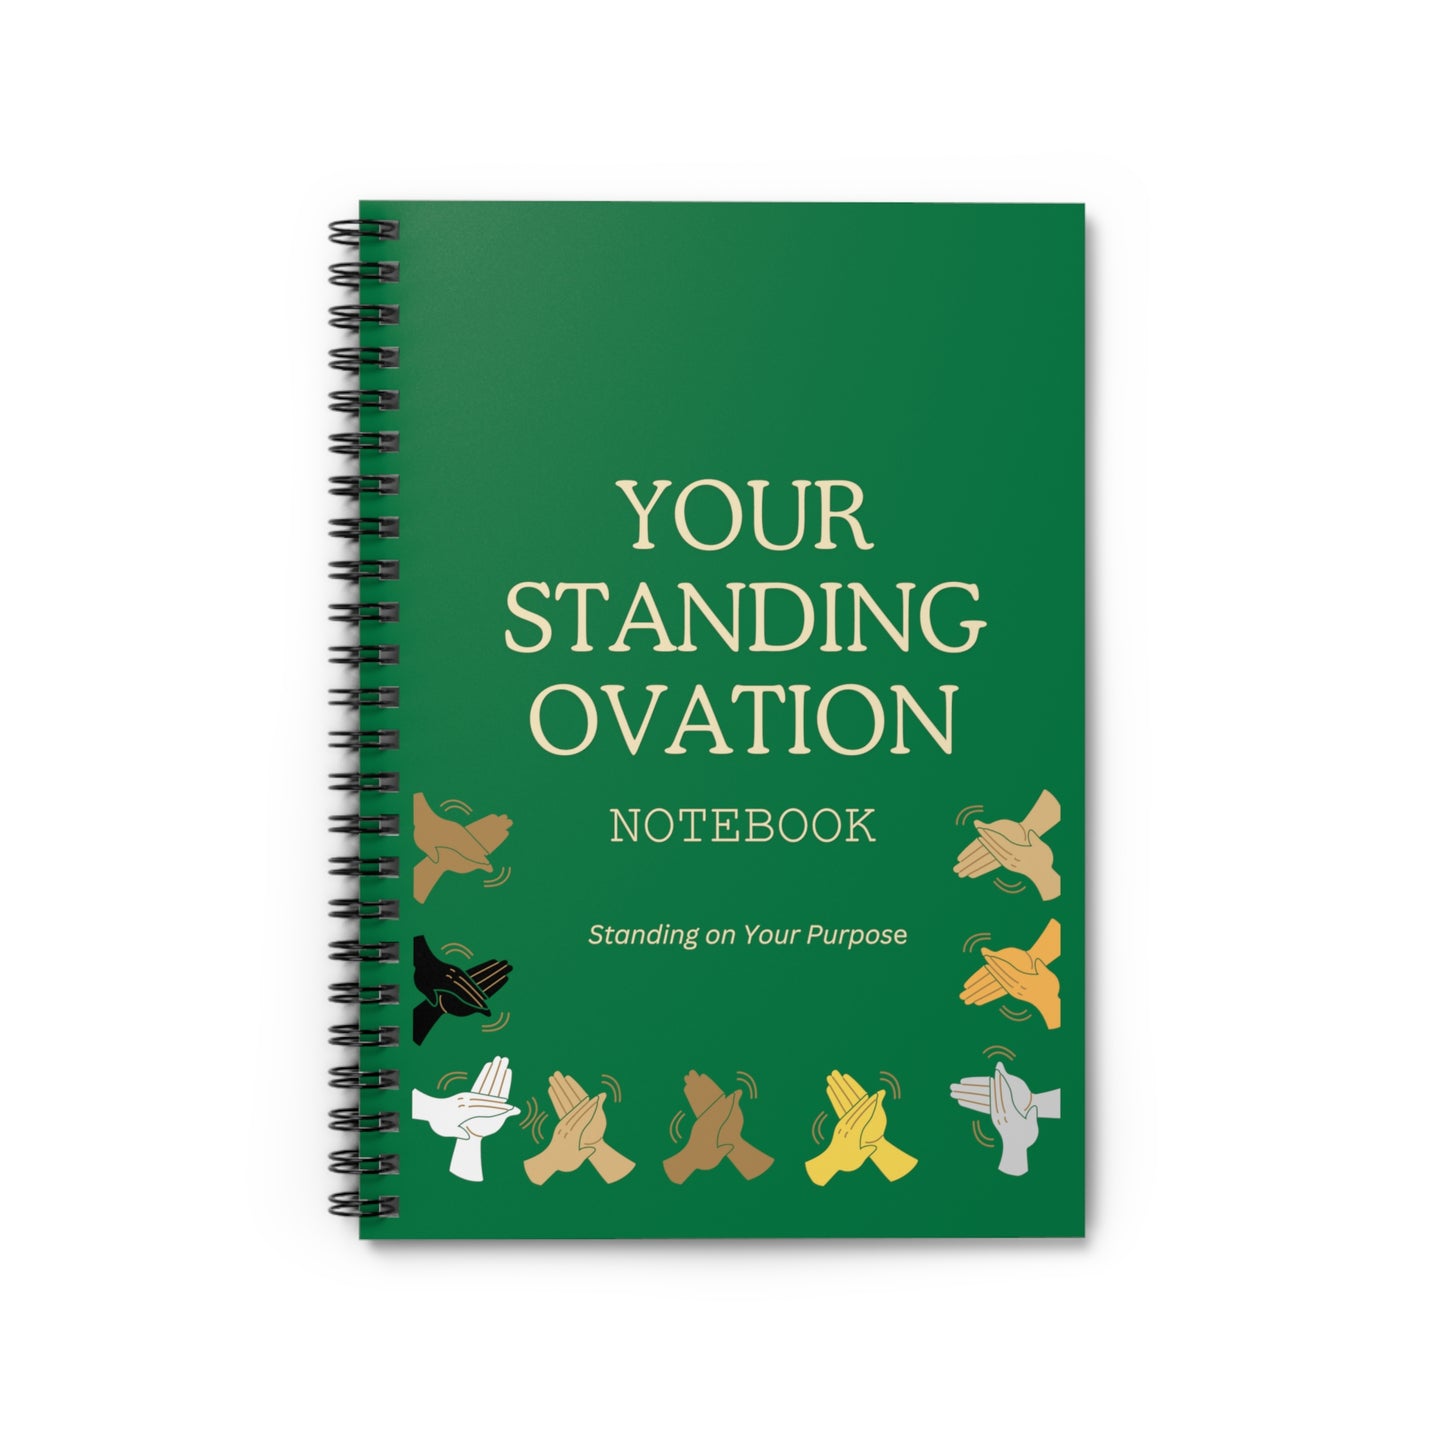 Your Standing Ovation Notebook